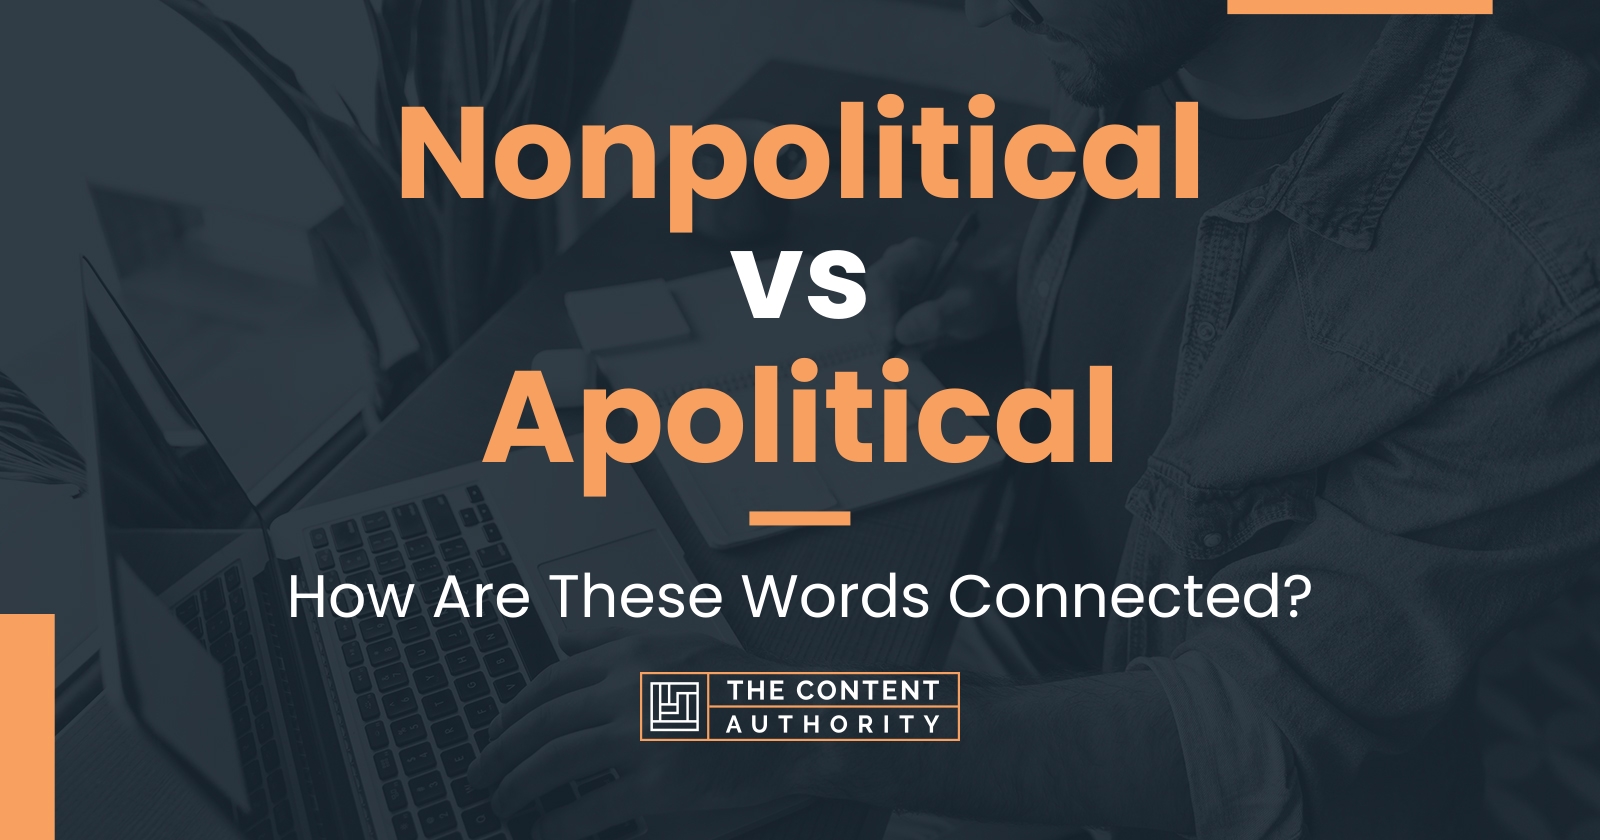 Nonpolitical vs Apolitical: How Are These Words Connected?